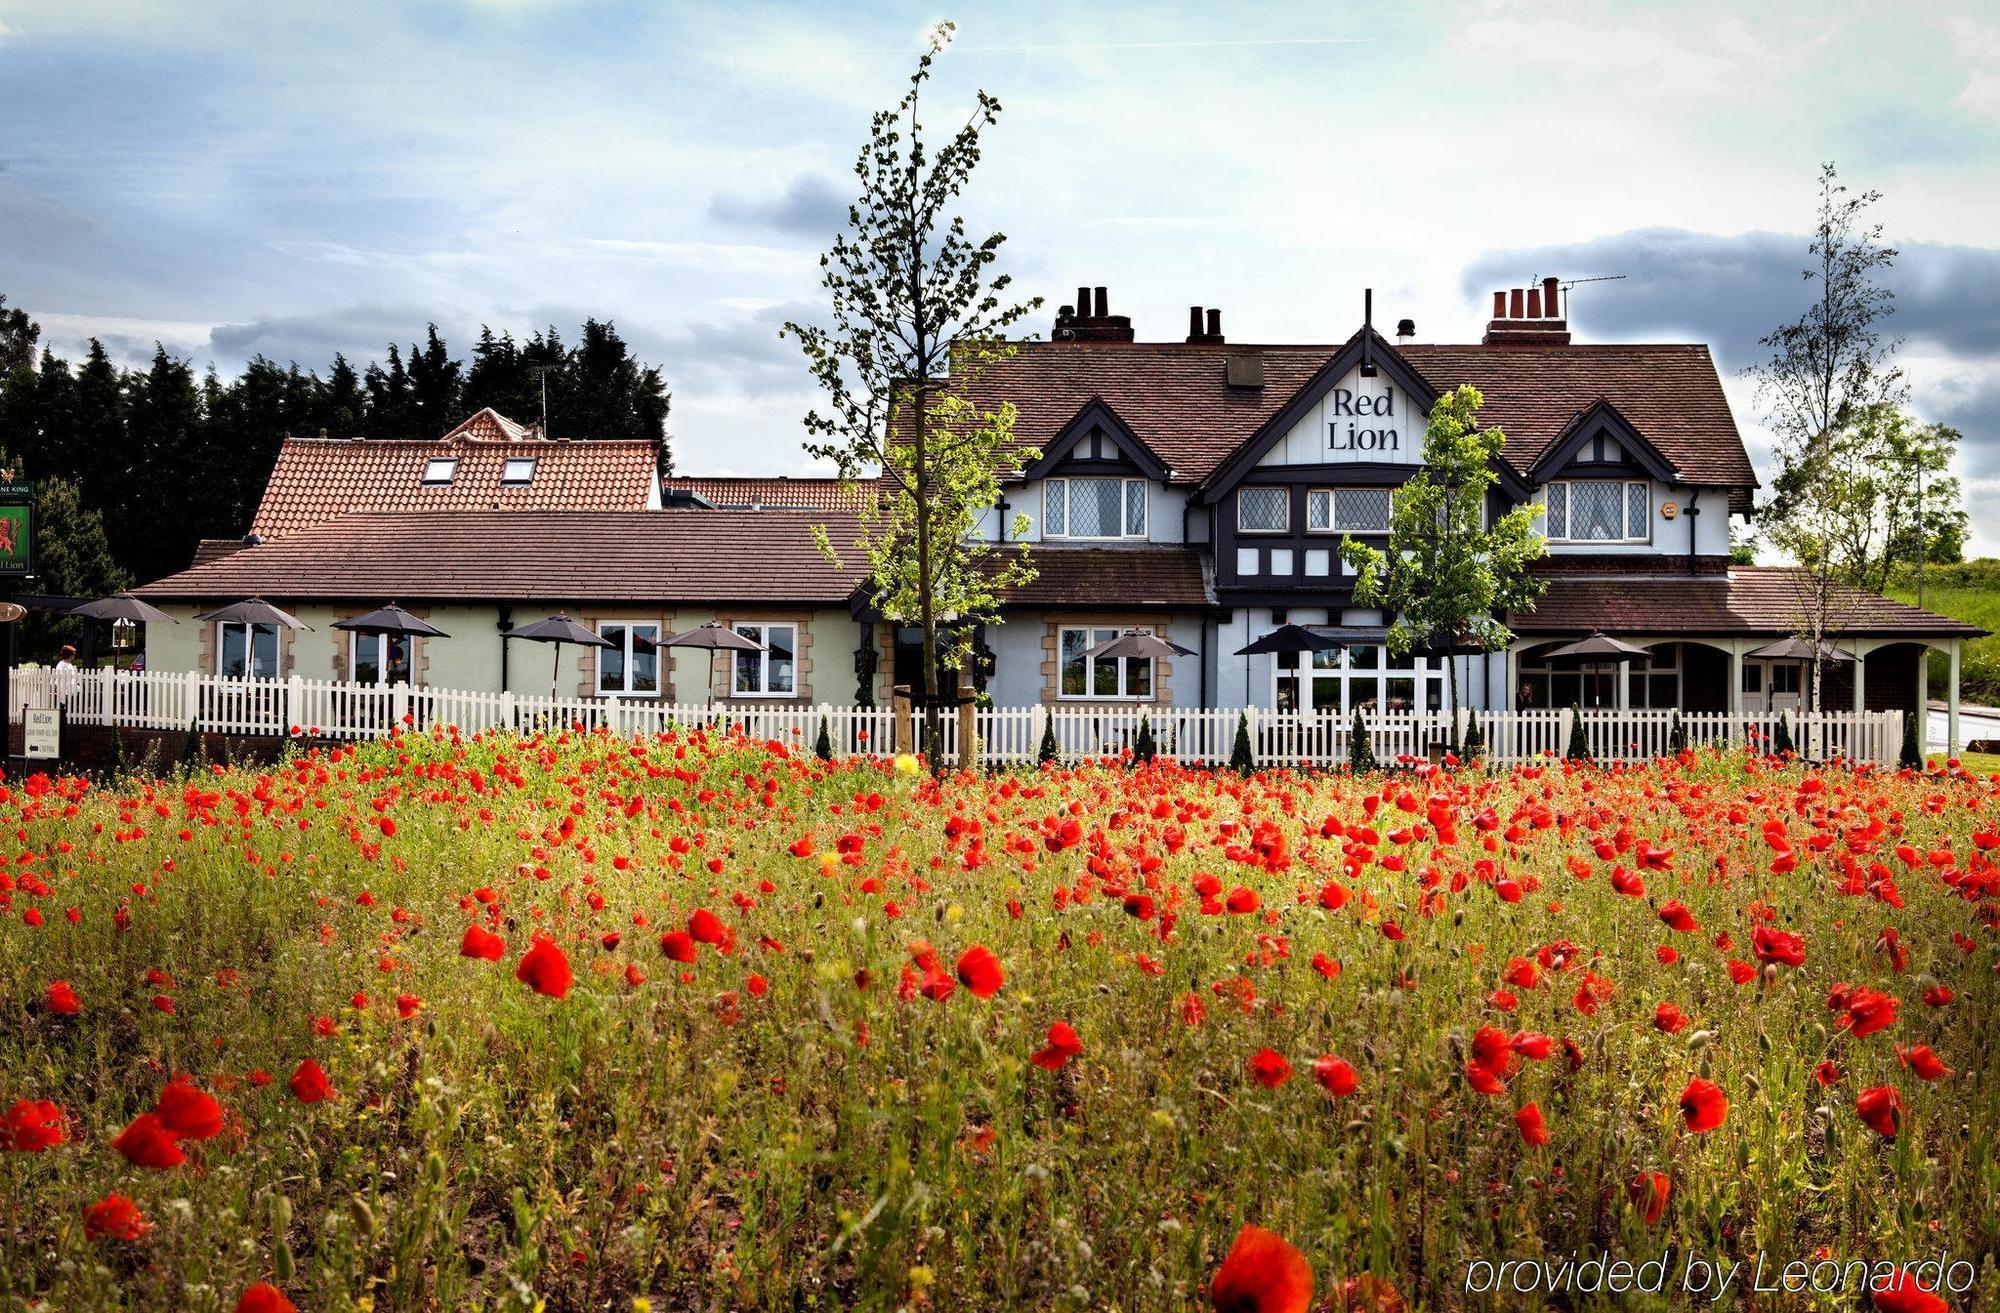 The Red Lion Inn By Chef & Brewer Collection Todwick Exteriér fotografie